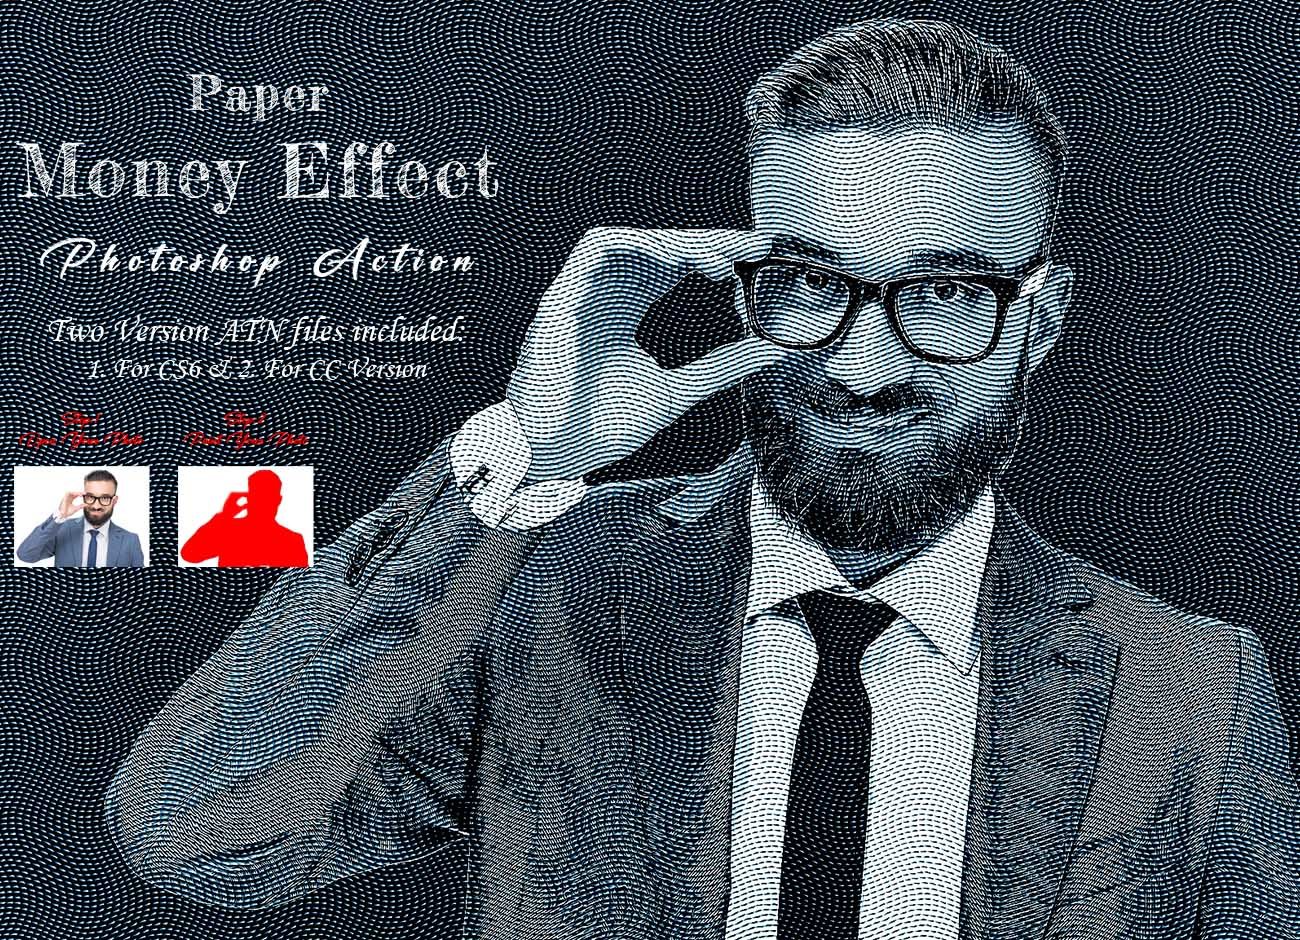 Paper Money Effect Photoshop Actioncover image.